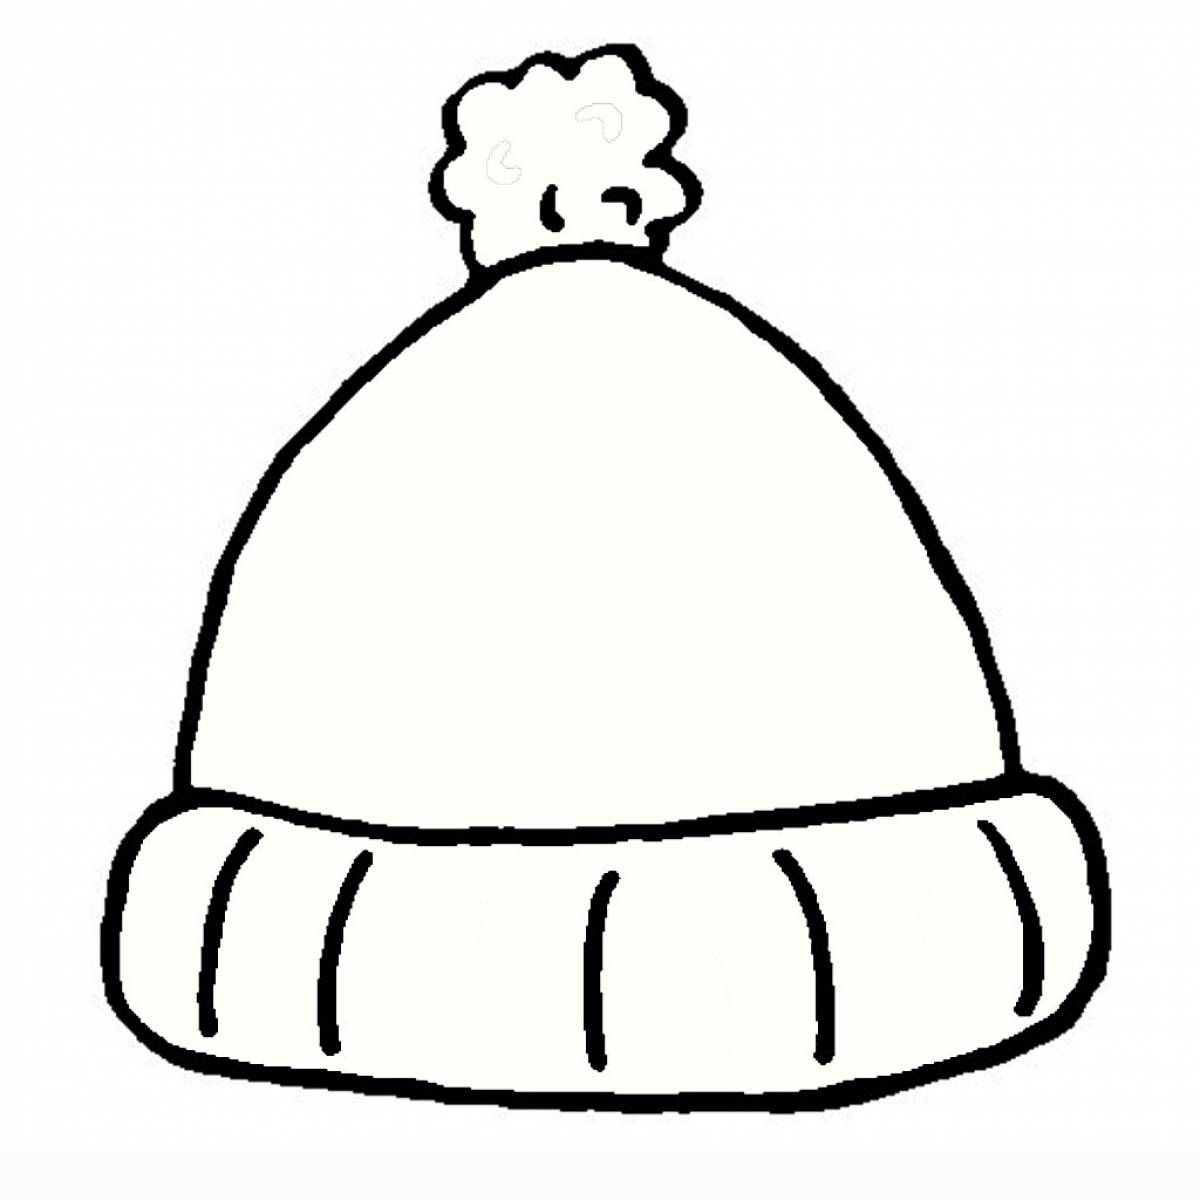 Coloring page stylish cap for kids 2-3 years old